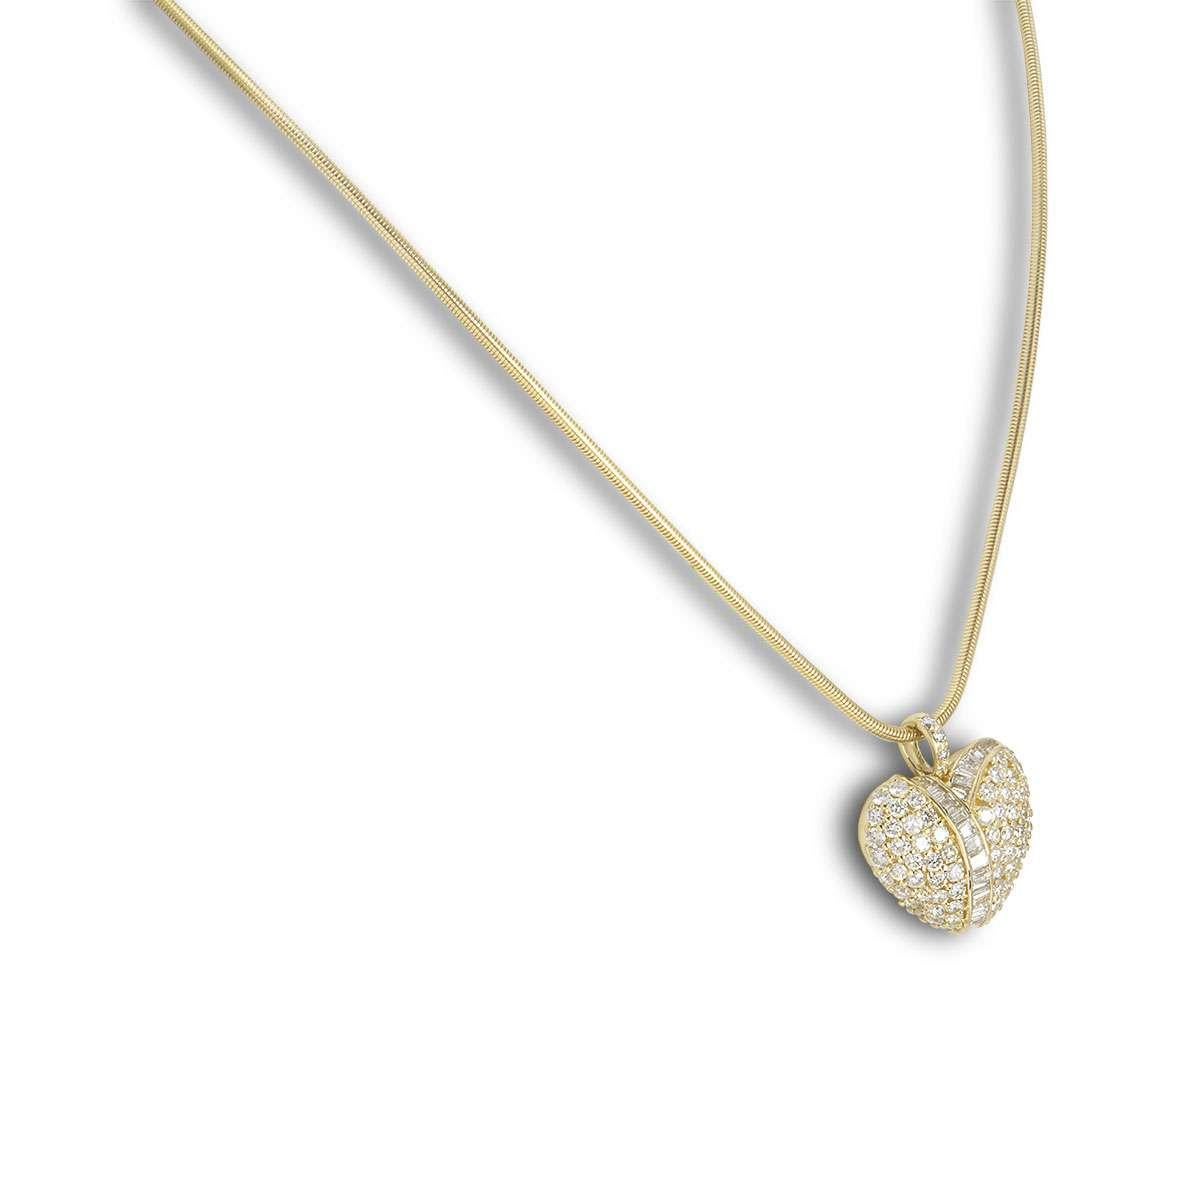 An 18k yellow gold diamond heart pendant. The heart is set with both round brilliant cut and baguette cut diamonds with a total weight of approximately 2.12ct. The heart measures 2.2cm in width and 2.5cm in length, including the bale. The necklace